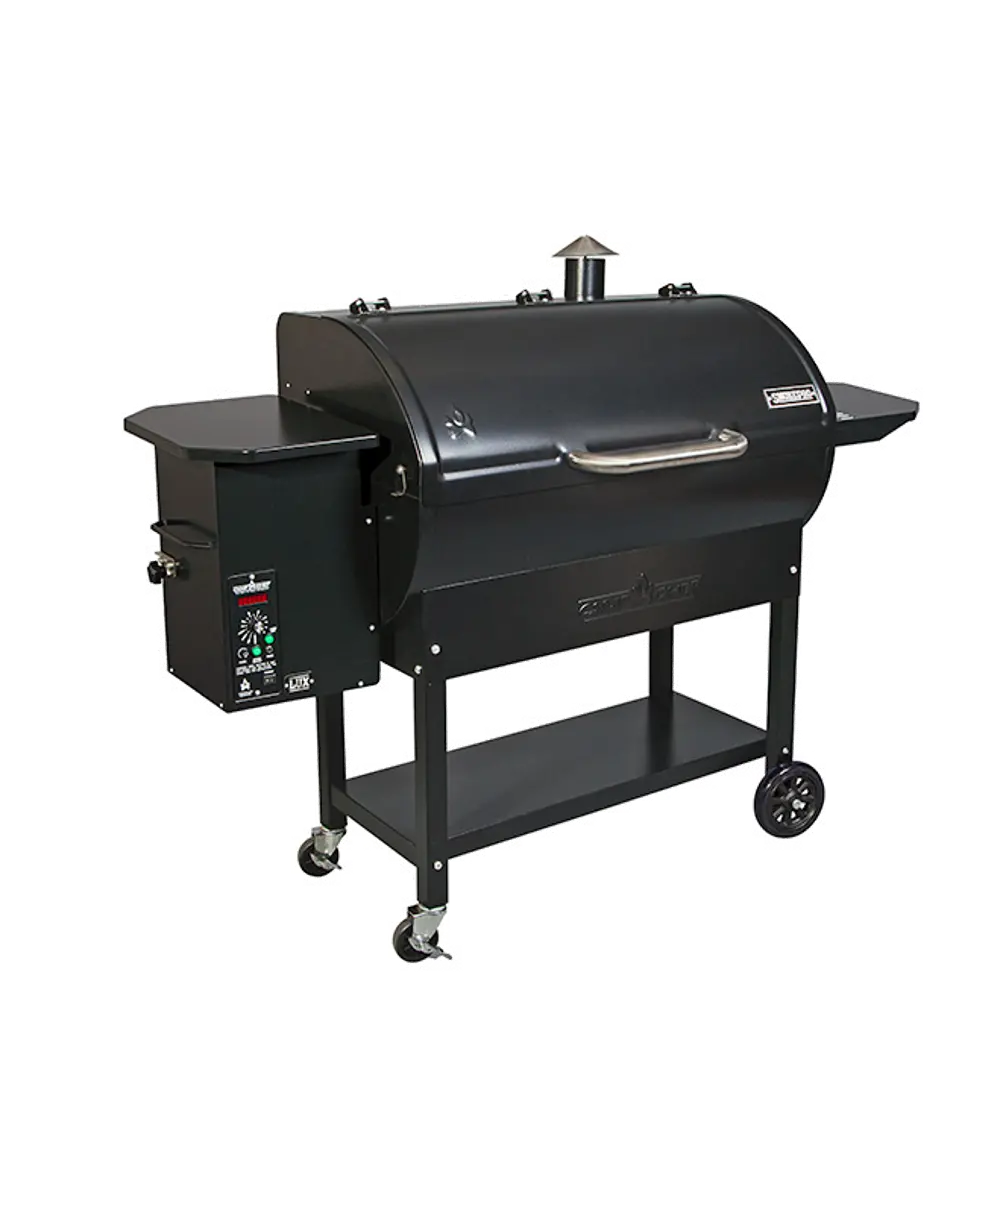 PG36LUX Camp Chef SmokePro LUX 36 Inch Pellet Grill - Black-1